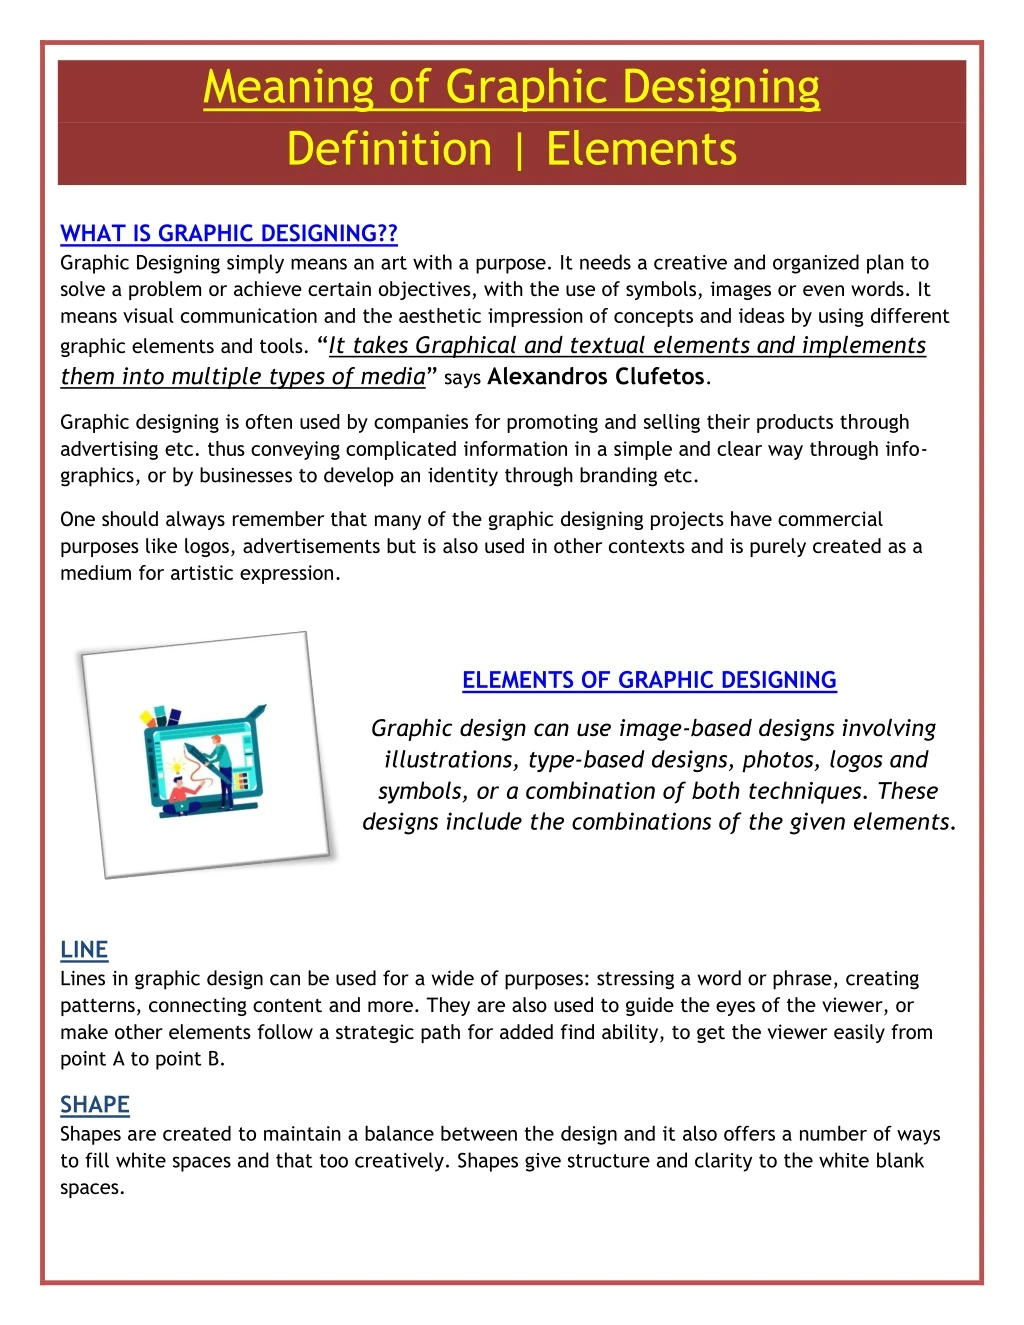 meaning of graphic designing definition elements